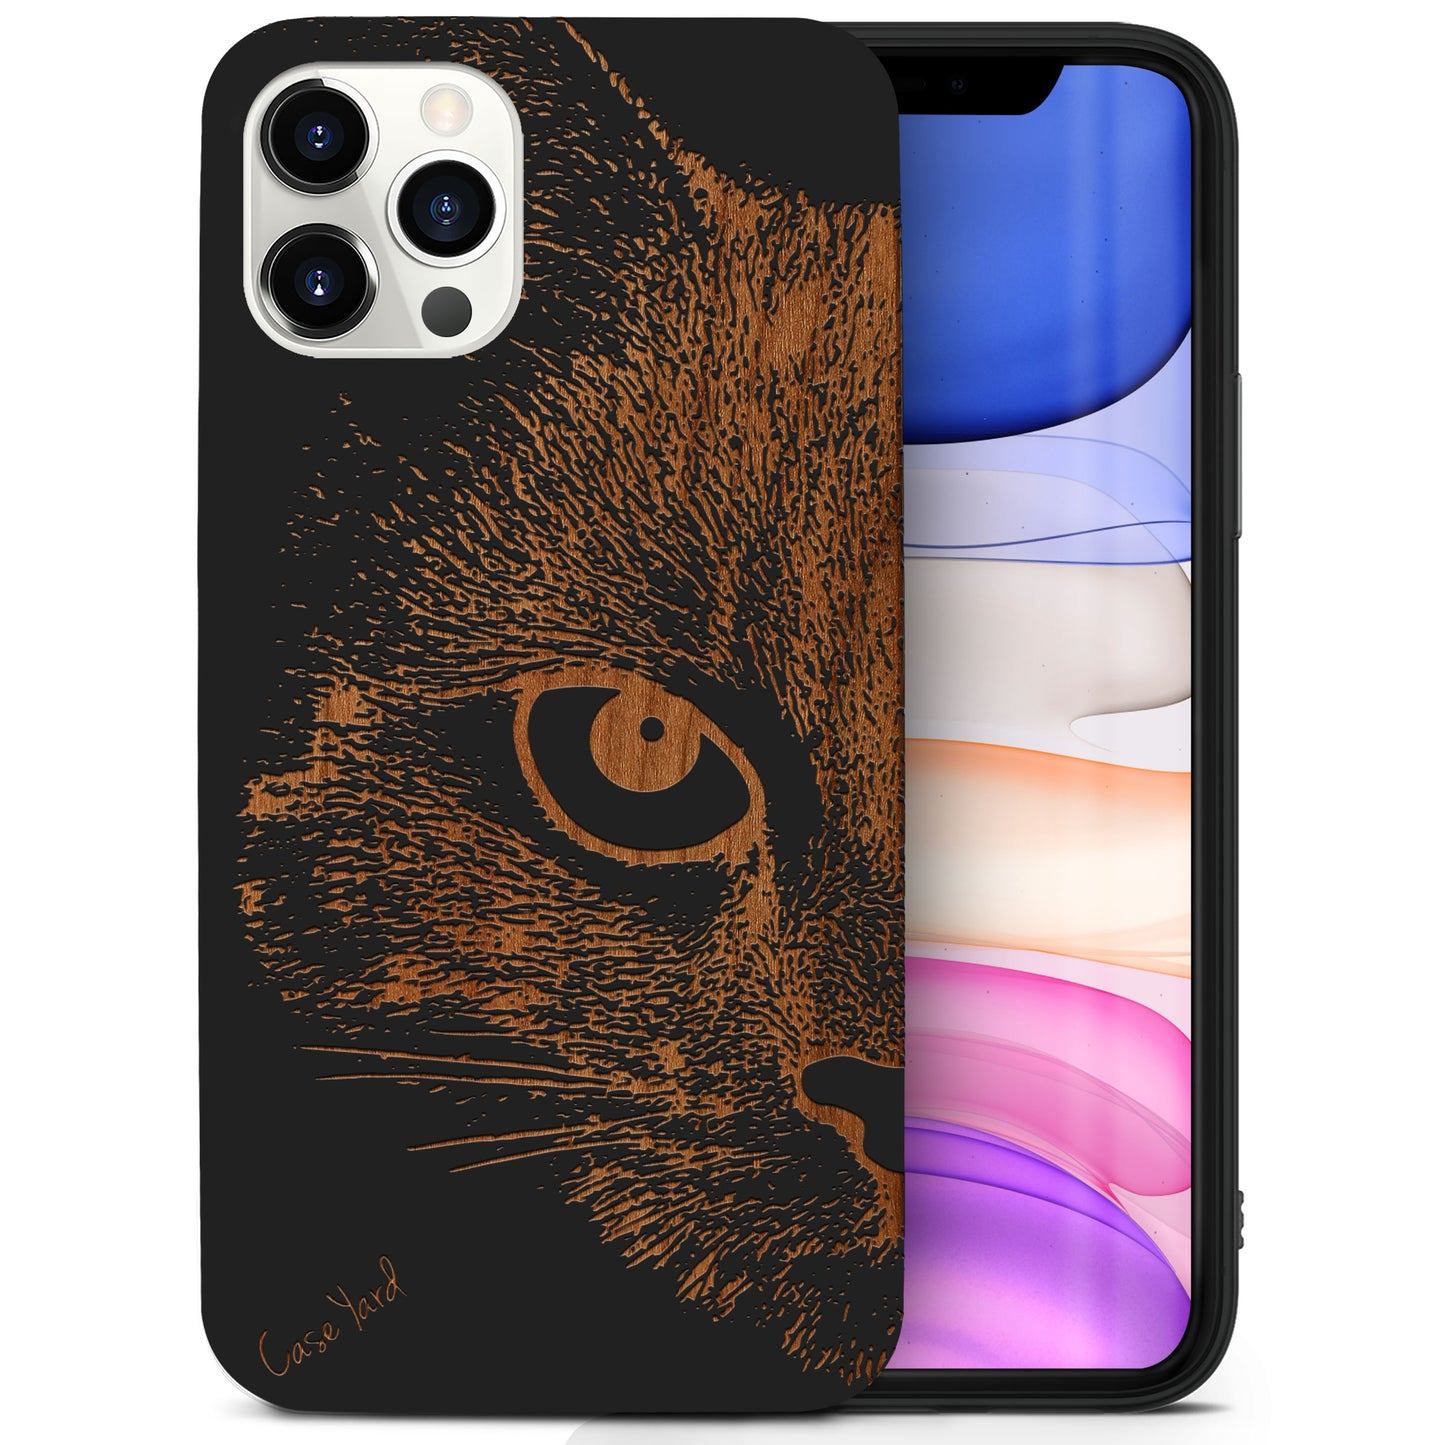 Wooden Cell Phone Case Cover, Laser Engraved case for iPhone & Samsung phone Mad Cat Design